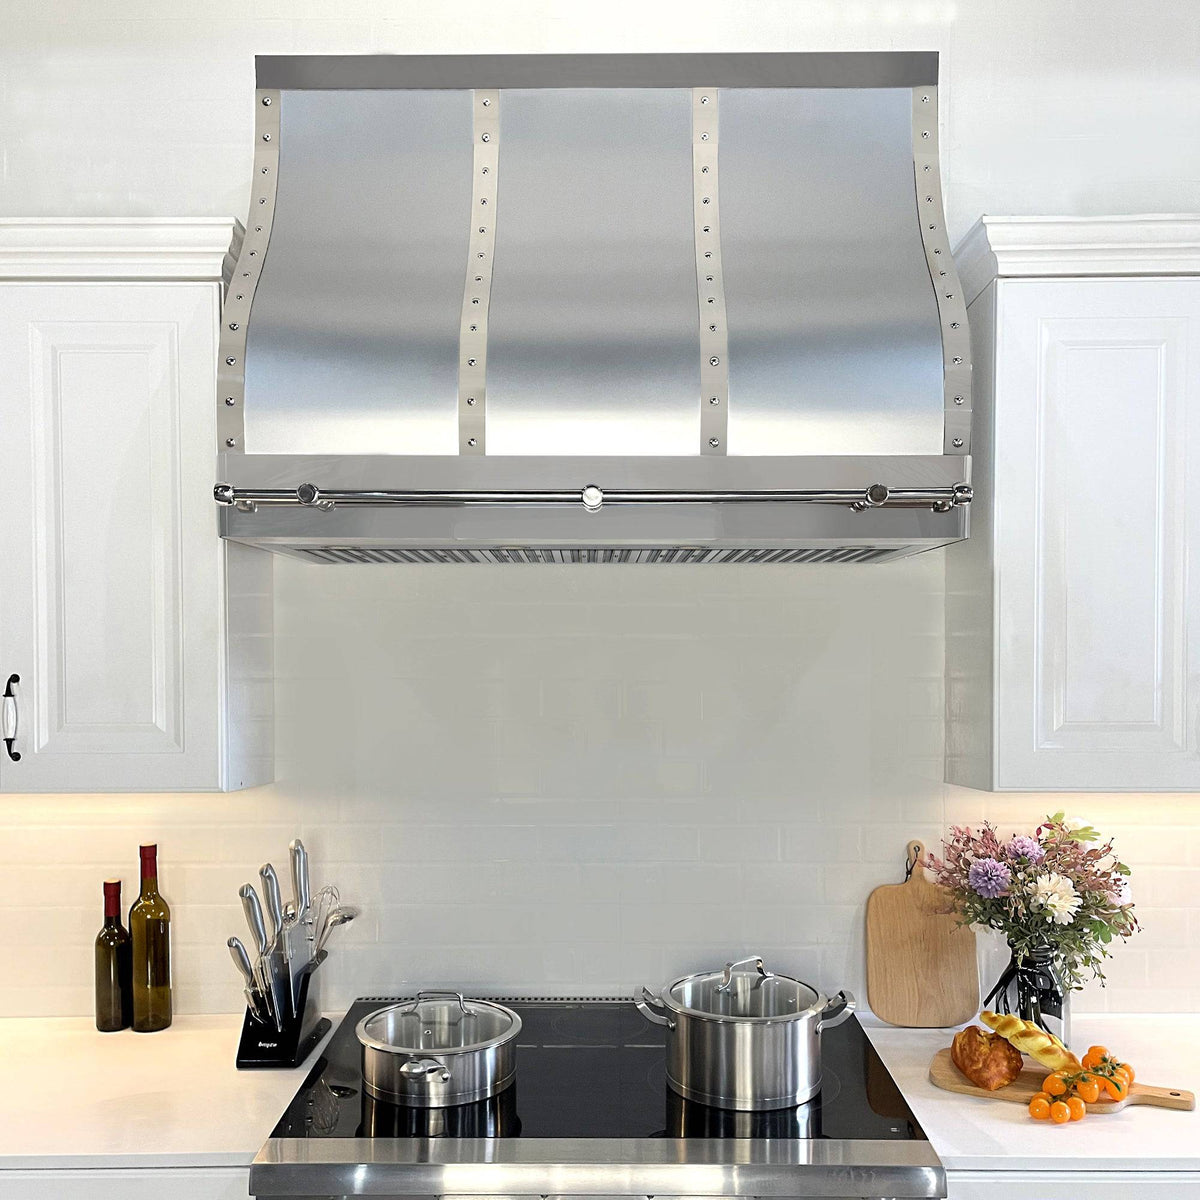 Fobest Handcrafted Brushed Stainless Steel Range Hood FSS-31